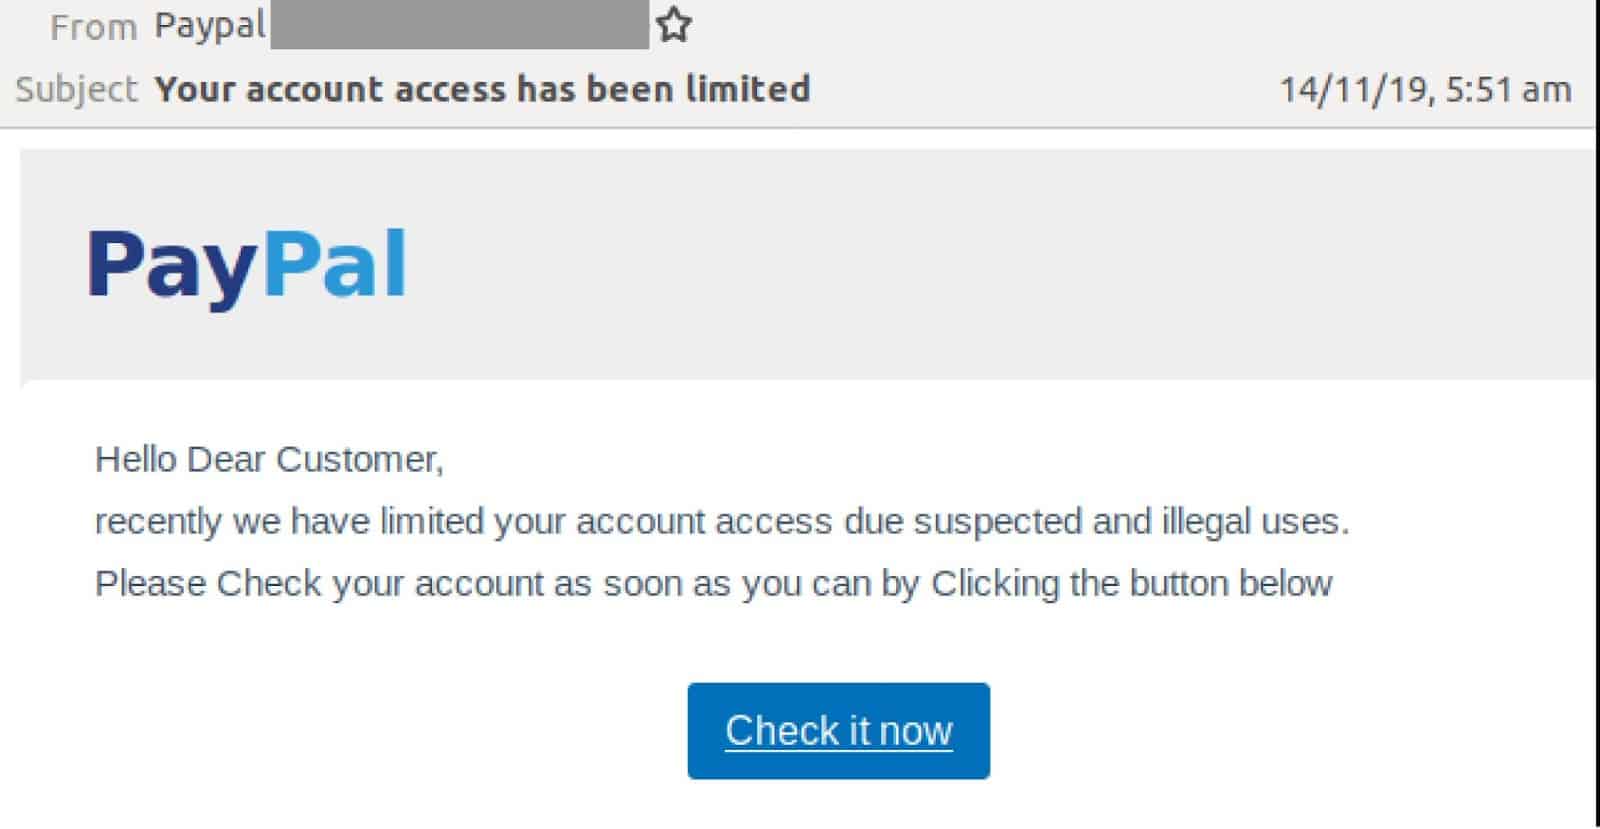 A "You’ve got a problem with your account" scam